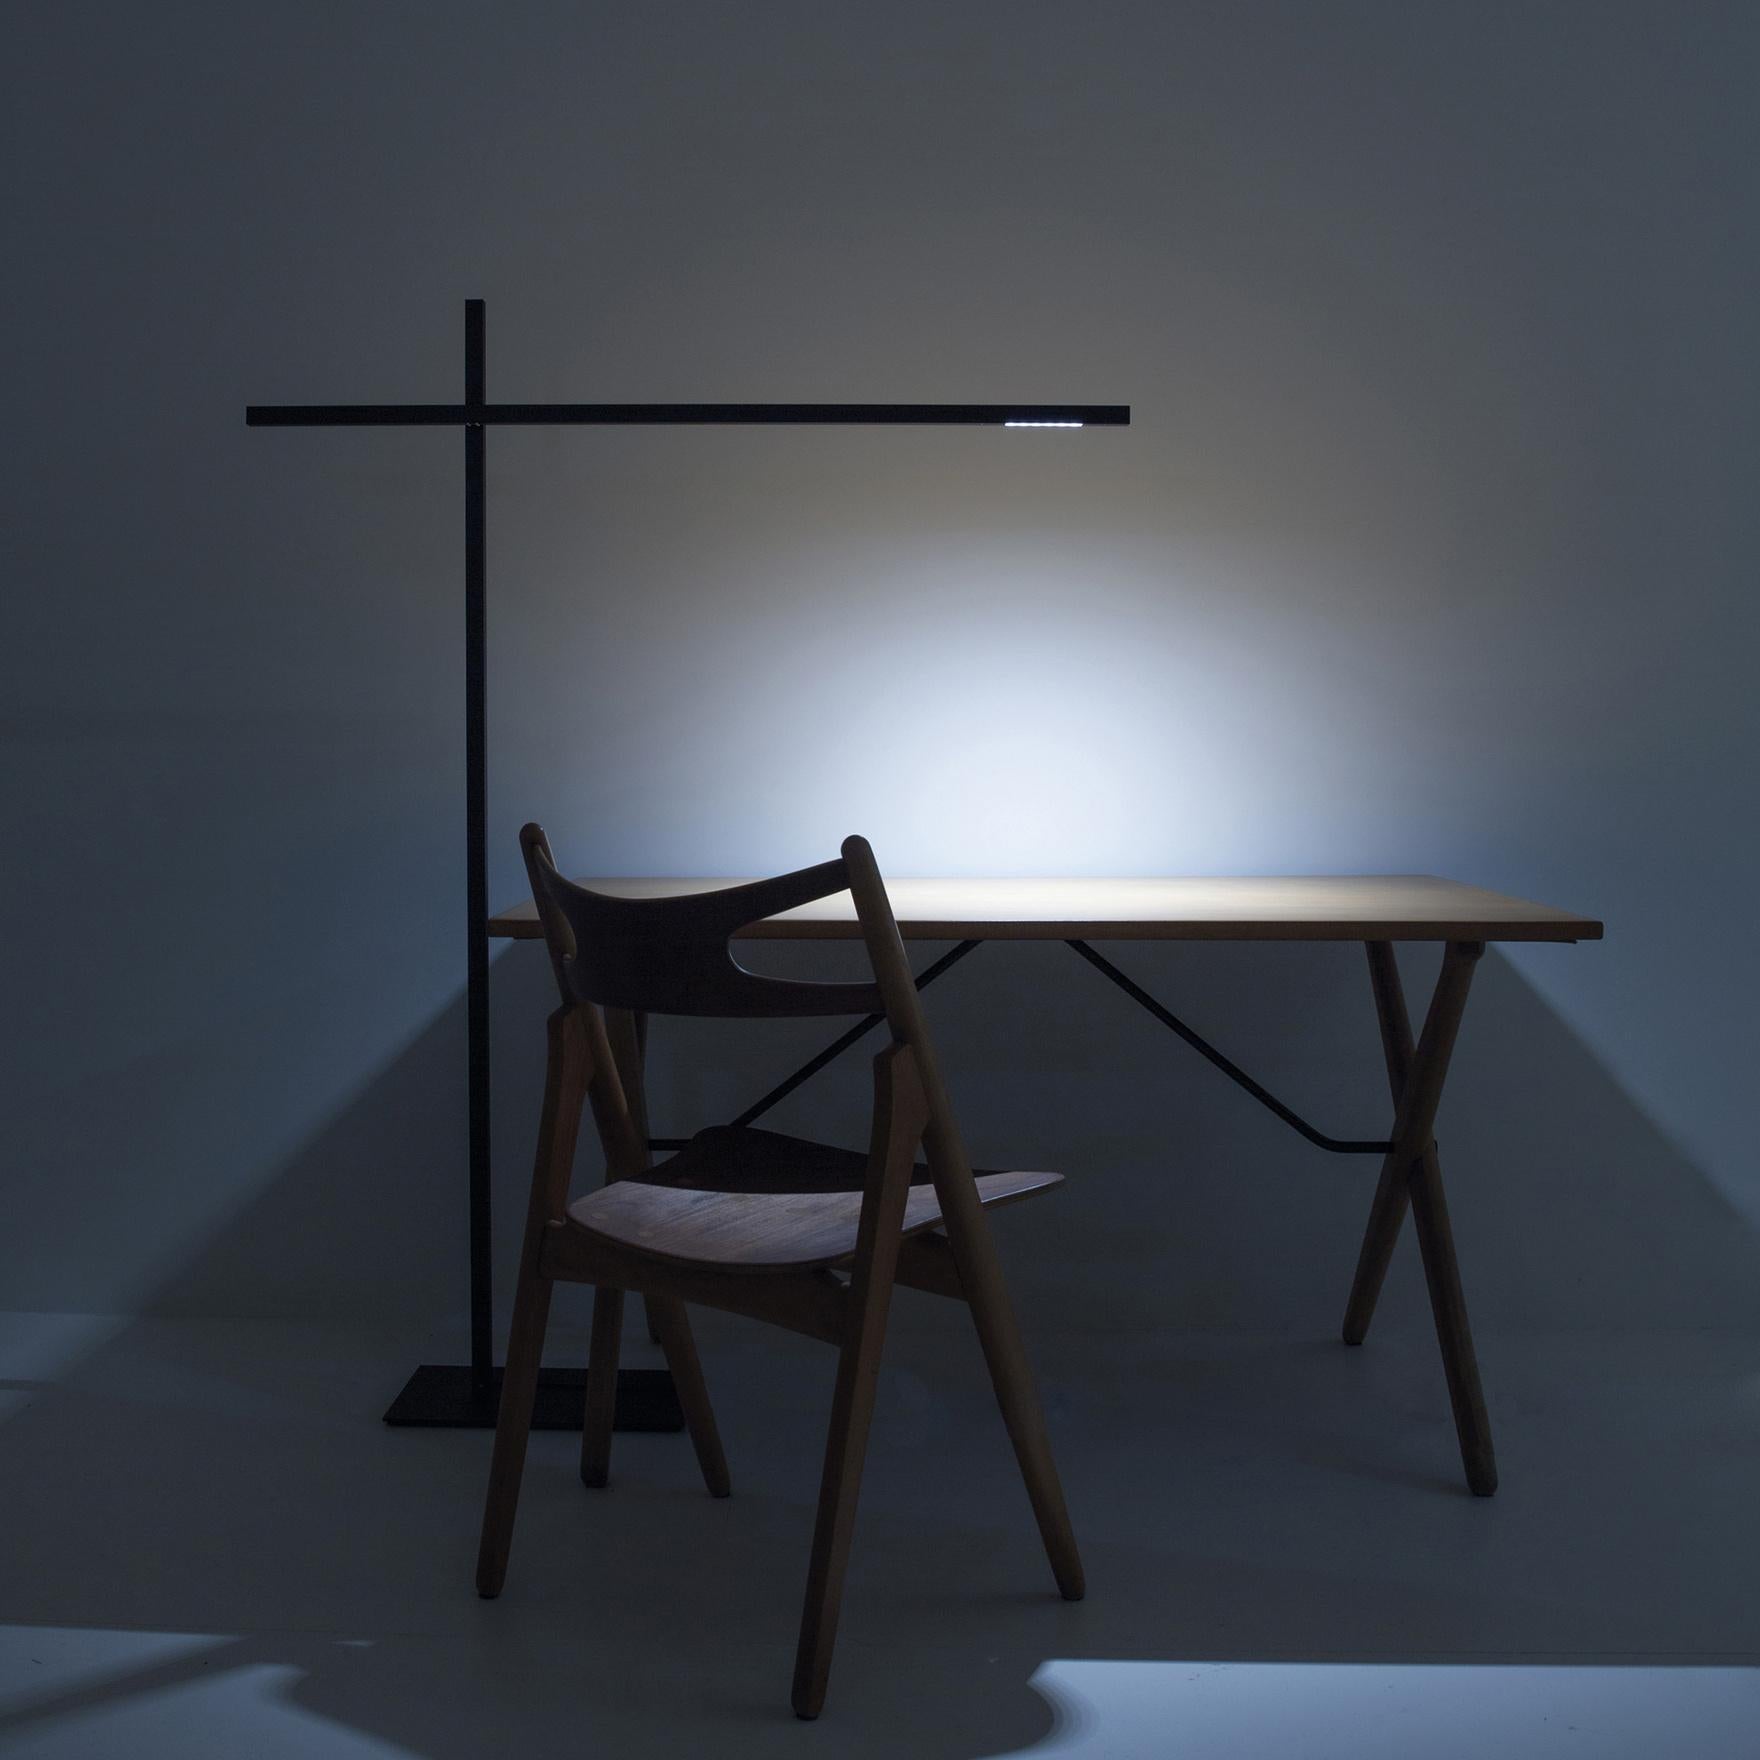 A floor lamp conceived to provide direct light in a simple and flexible manner.
Its principle component is the pivot point between two “chopsticks” (Hashi)
that serve as light sources which, positioned in different ways, create a strong, graphic